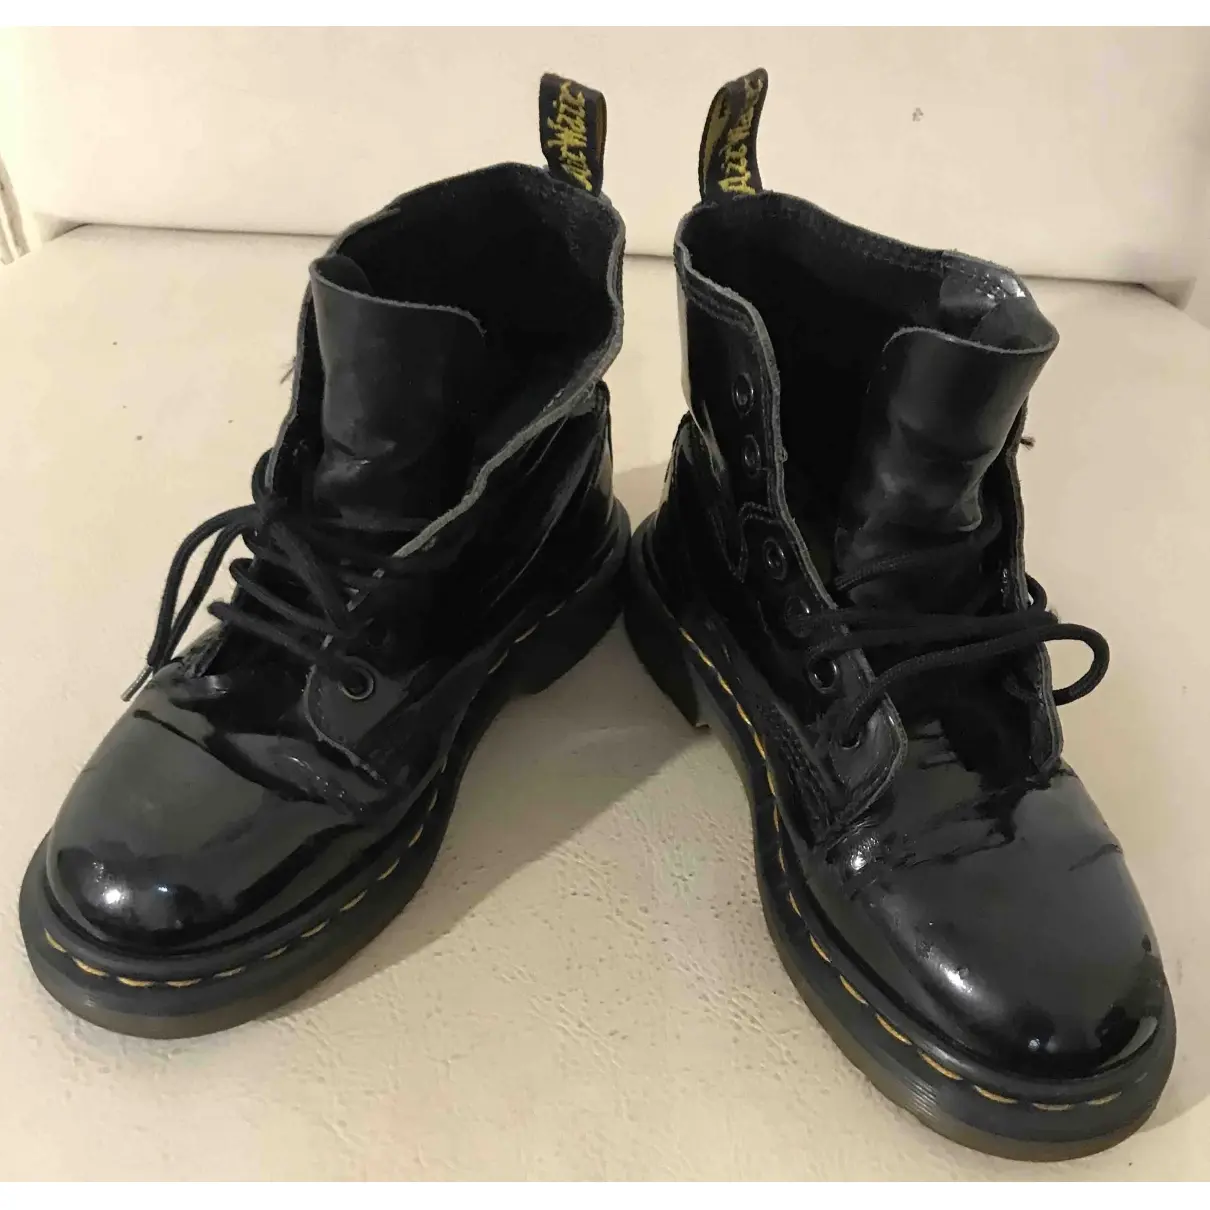 Buy Dr. Martens 1914 (14 eye) patent leather riding boots online